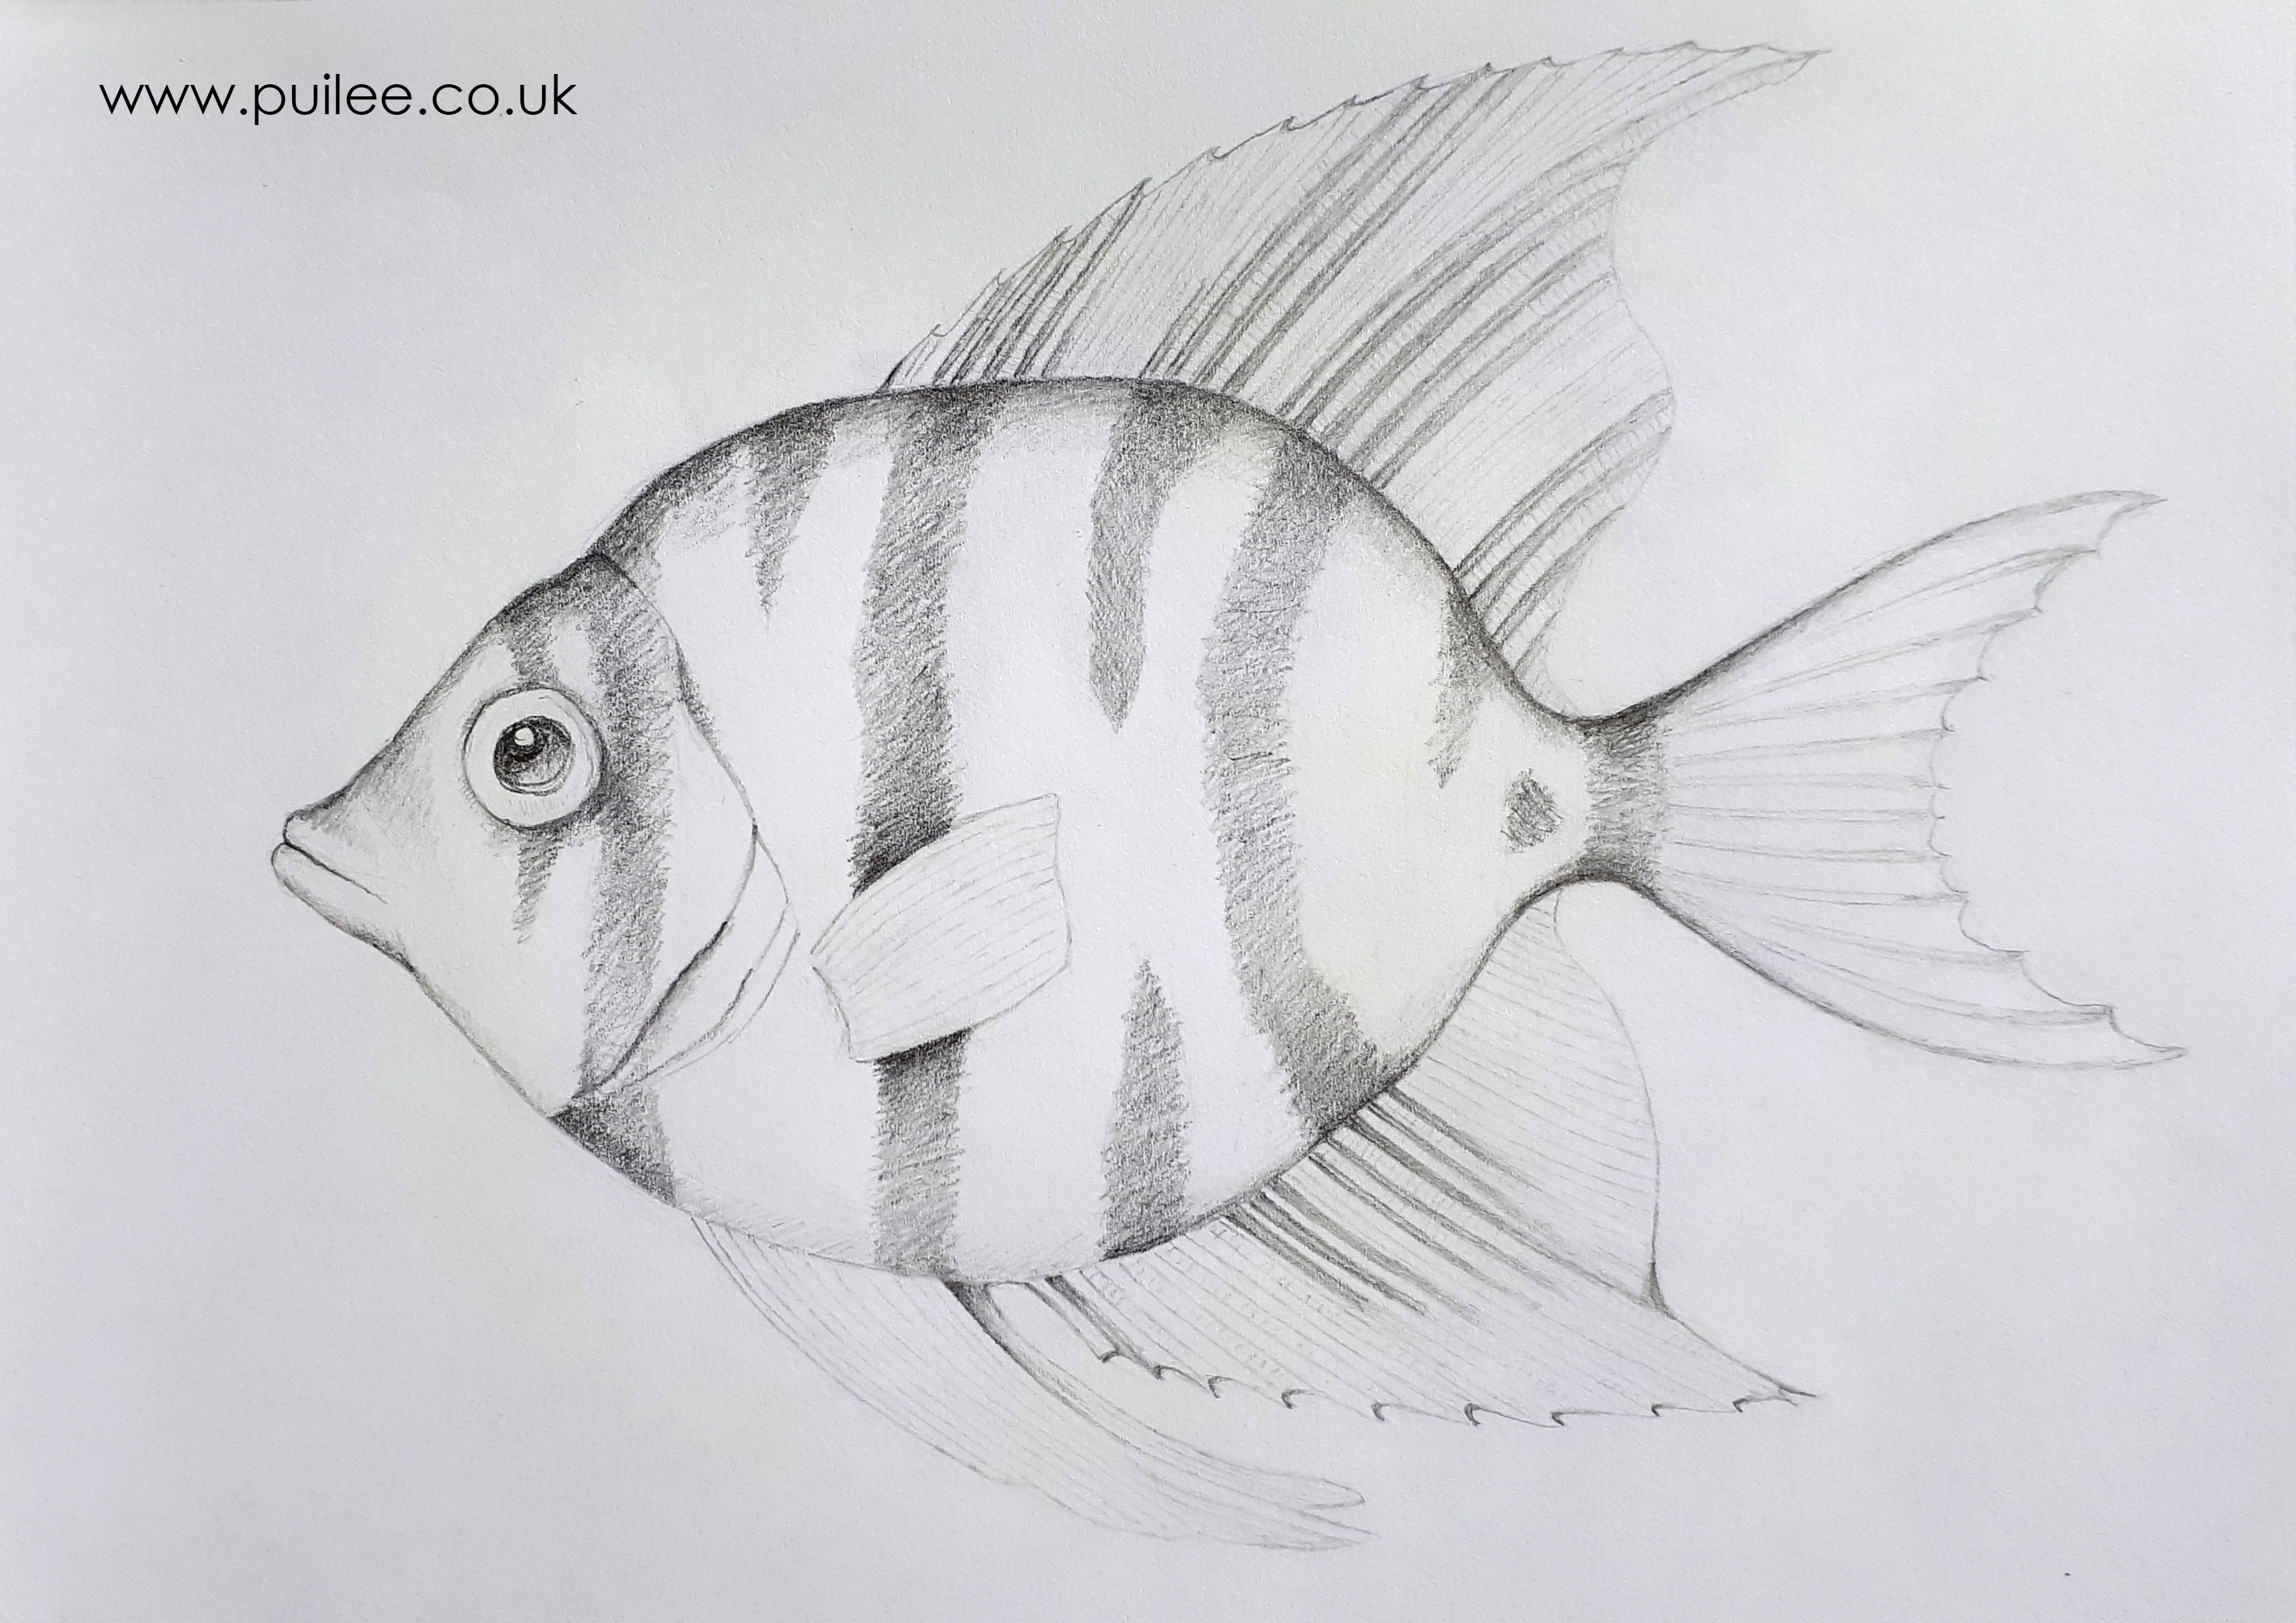 Zebrafish (2020) pencil on paper by Artist Pui Lee